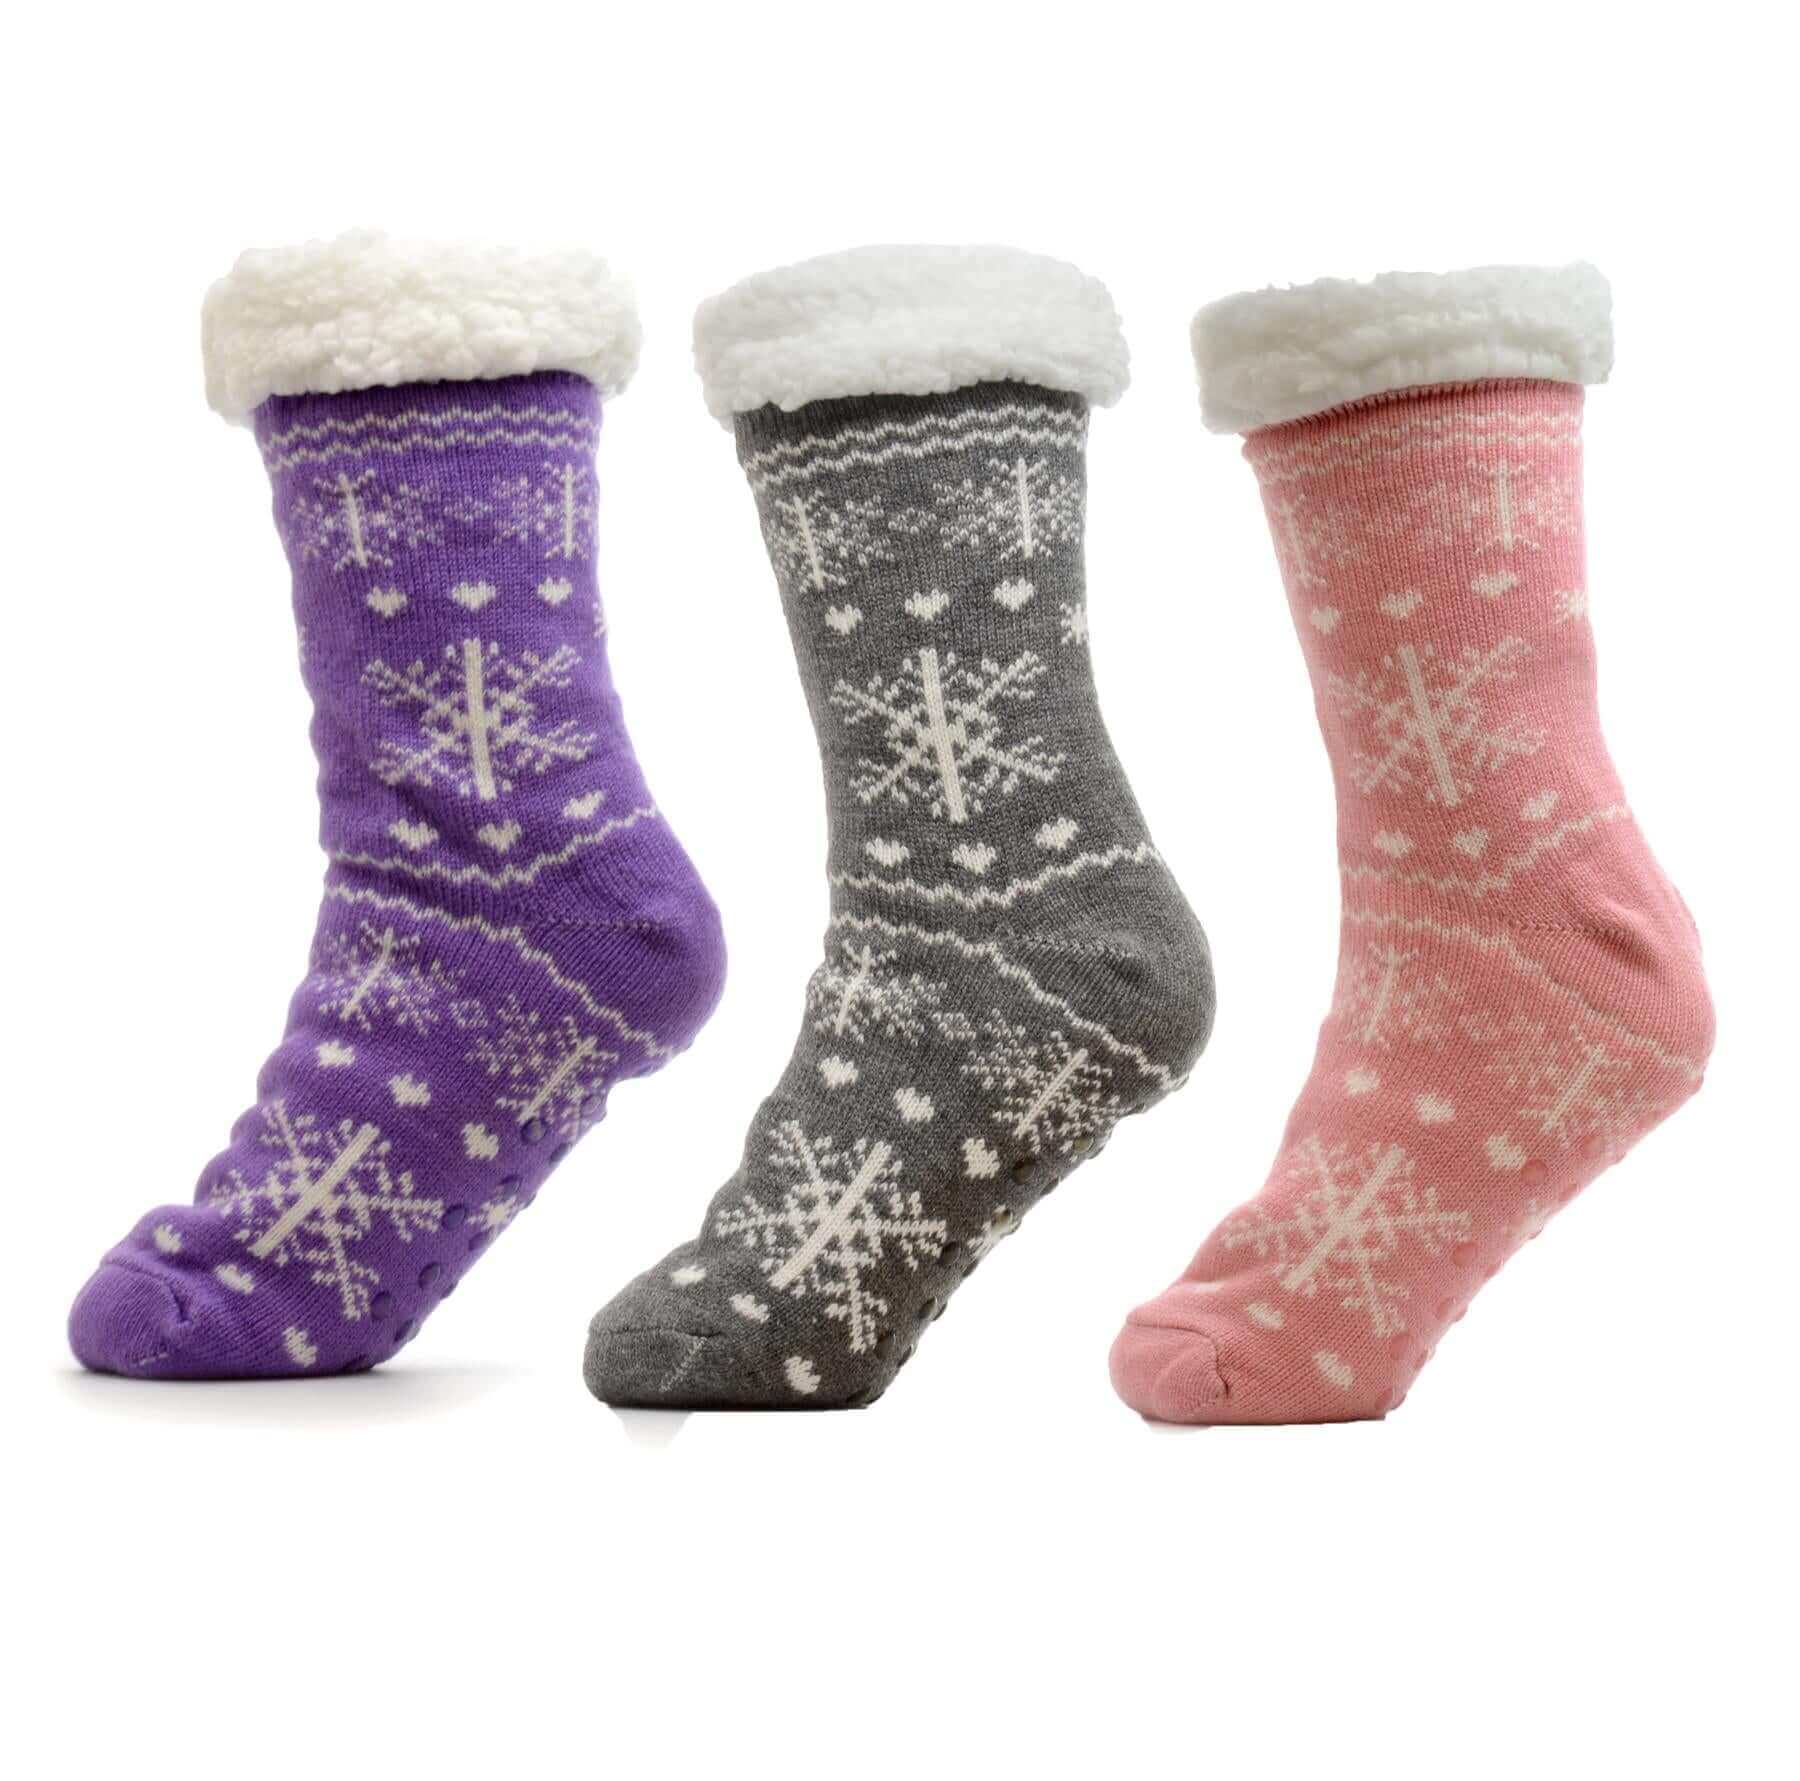 Pack Of 3 Women's Slipper Socks, Chunky Knit Stocking Fillers, Fur Lined Boot Sock. Buy now for £20.00. A Socks by Sock Stack. 4-7, acrylic, assorted, blush pink, boot, boot socks, breathable, chunky, comfortable, dusky pink, faux fur, festive, fleece, fl